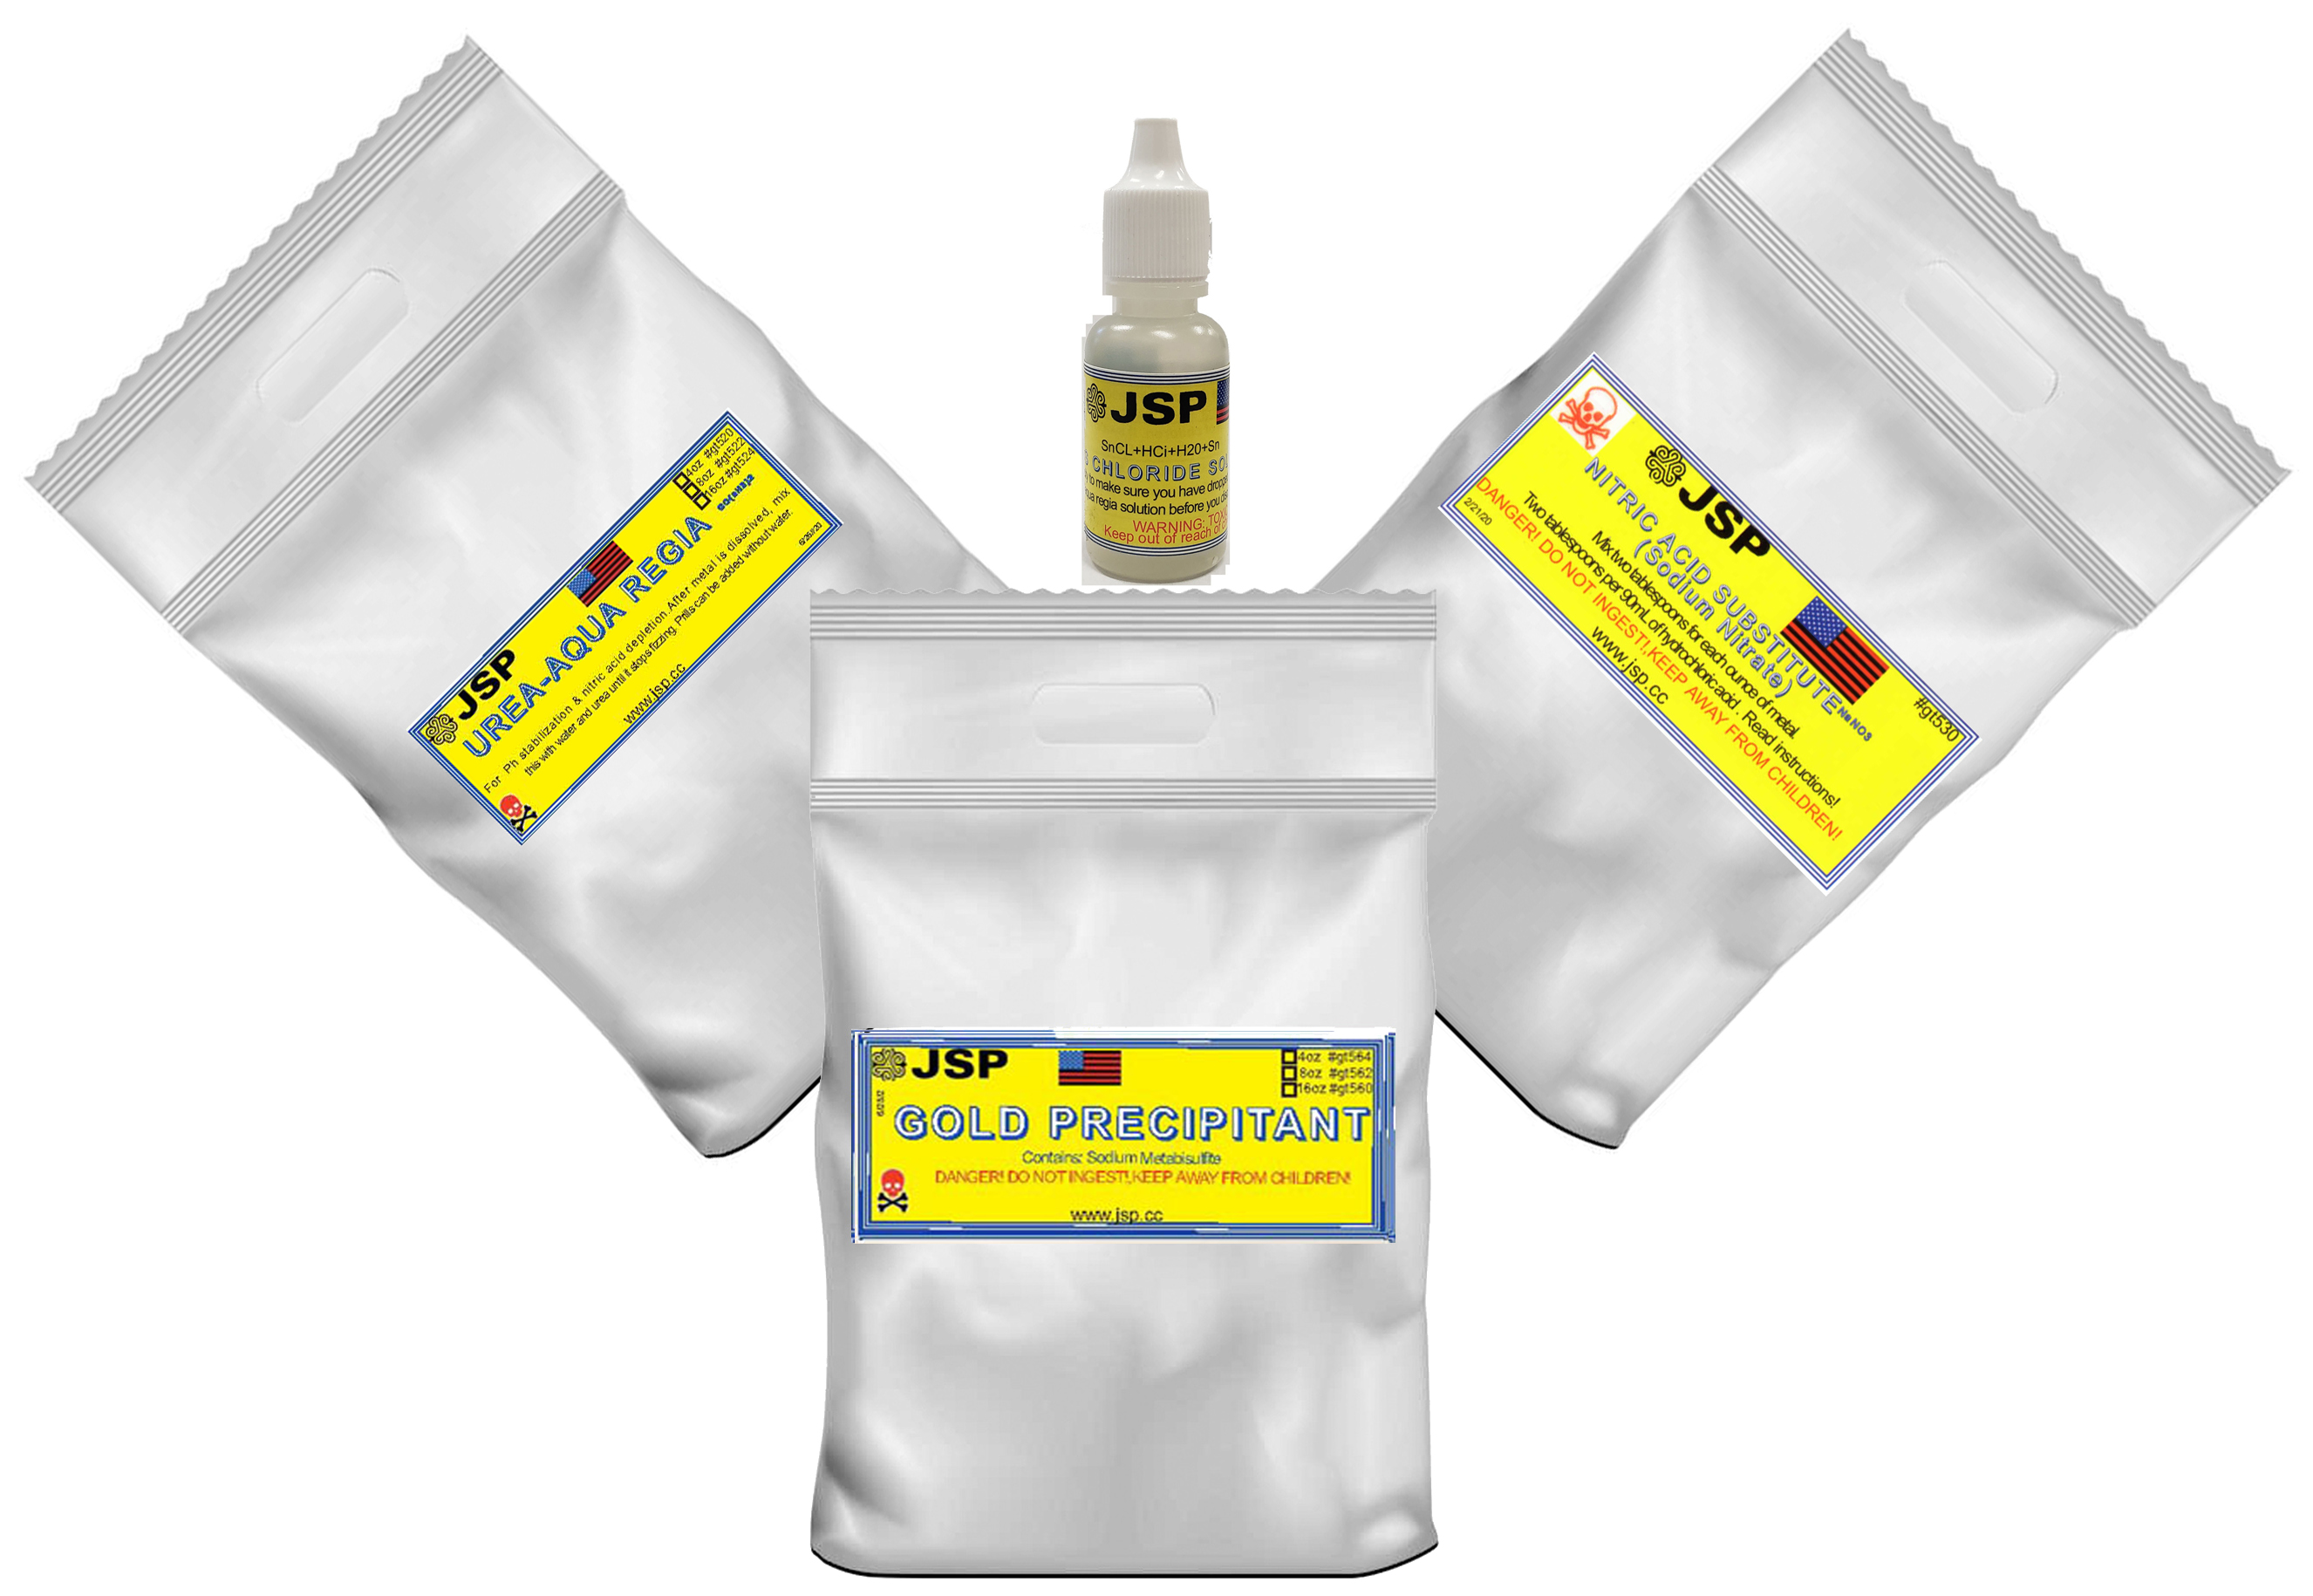 Aqua regia gold refining supply kit, 2x 1/4lb bags +Stannous Chloride with instructions. - Click Image to Close